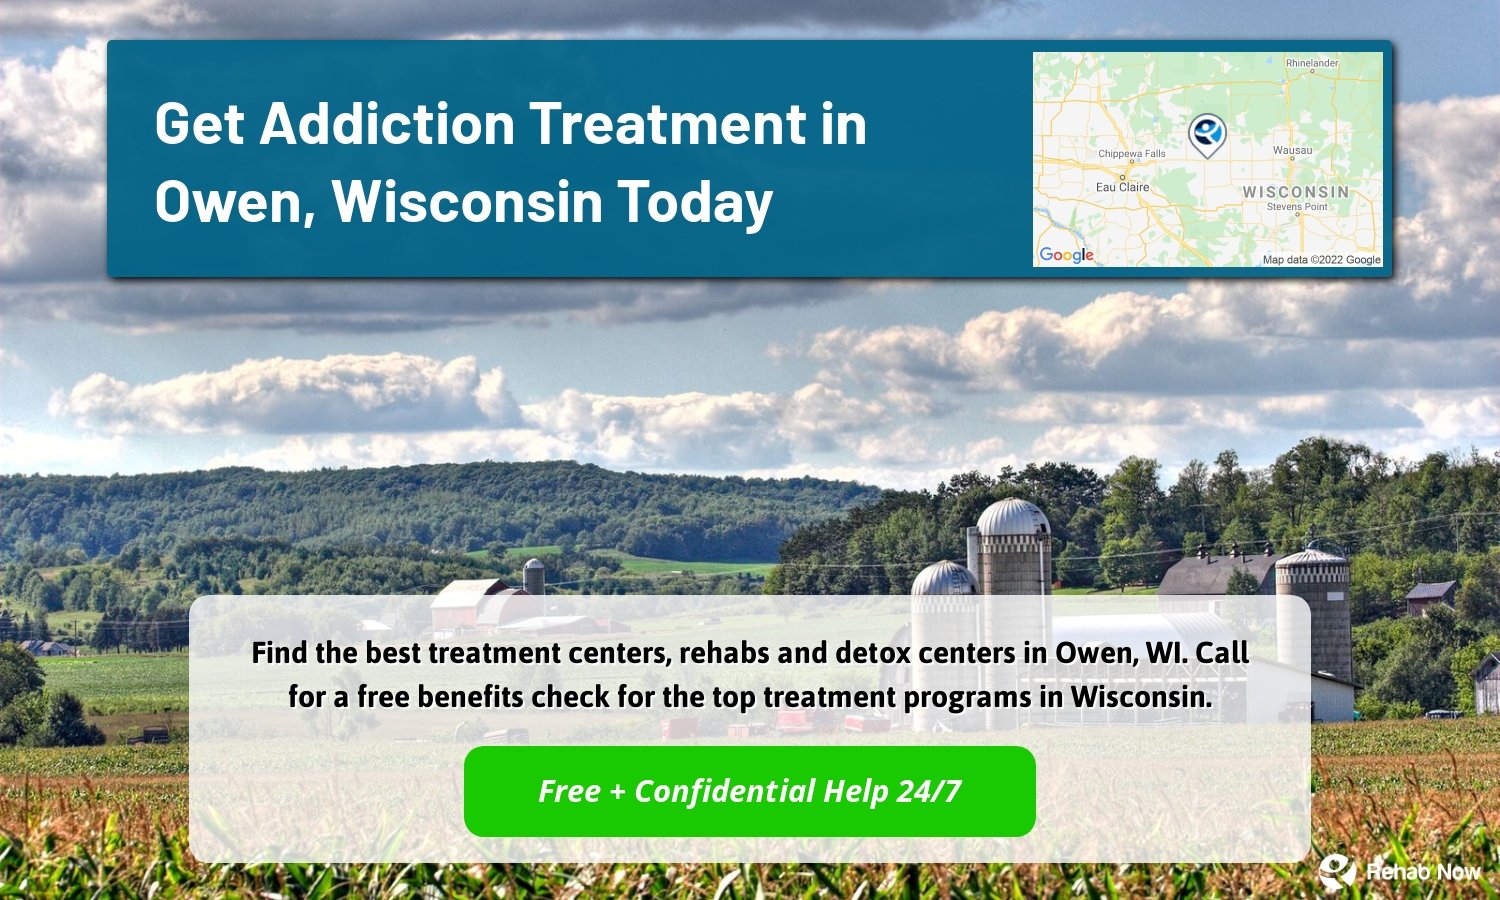 Find the best treatment centers, rehabs and detox centers in Owen, WI. Call for a free benefits check for the top treatment programs in Wisconsin.